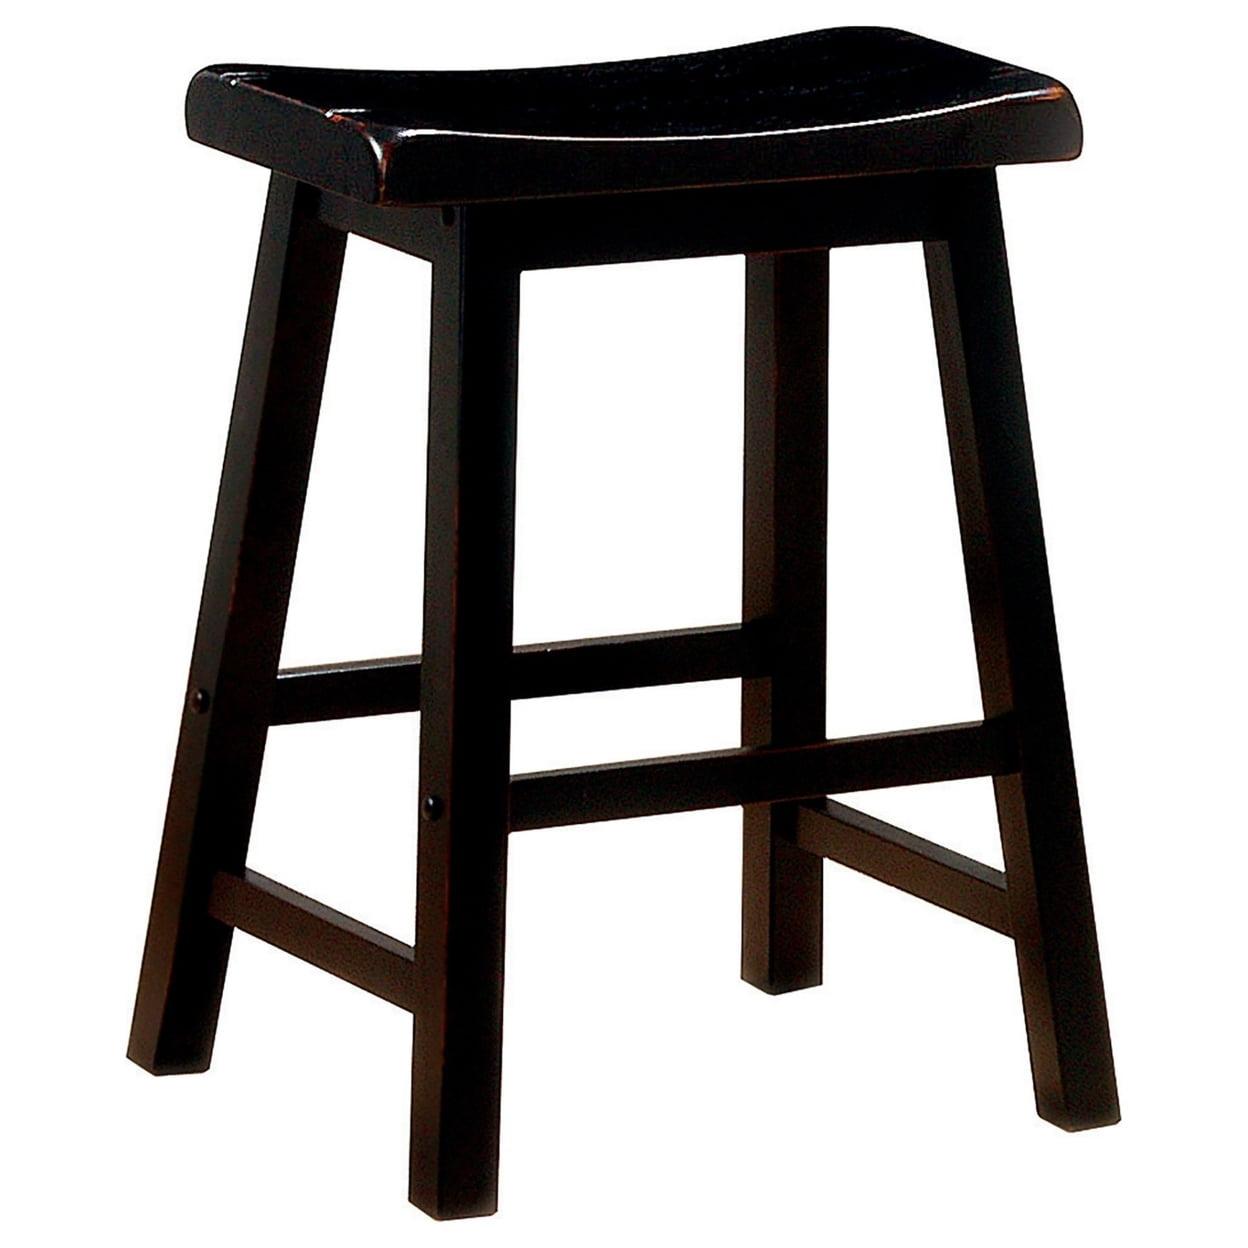 Transitional Black Wooden Saddle Counter Stools, 24" Height (Set of 2)